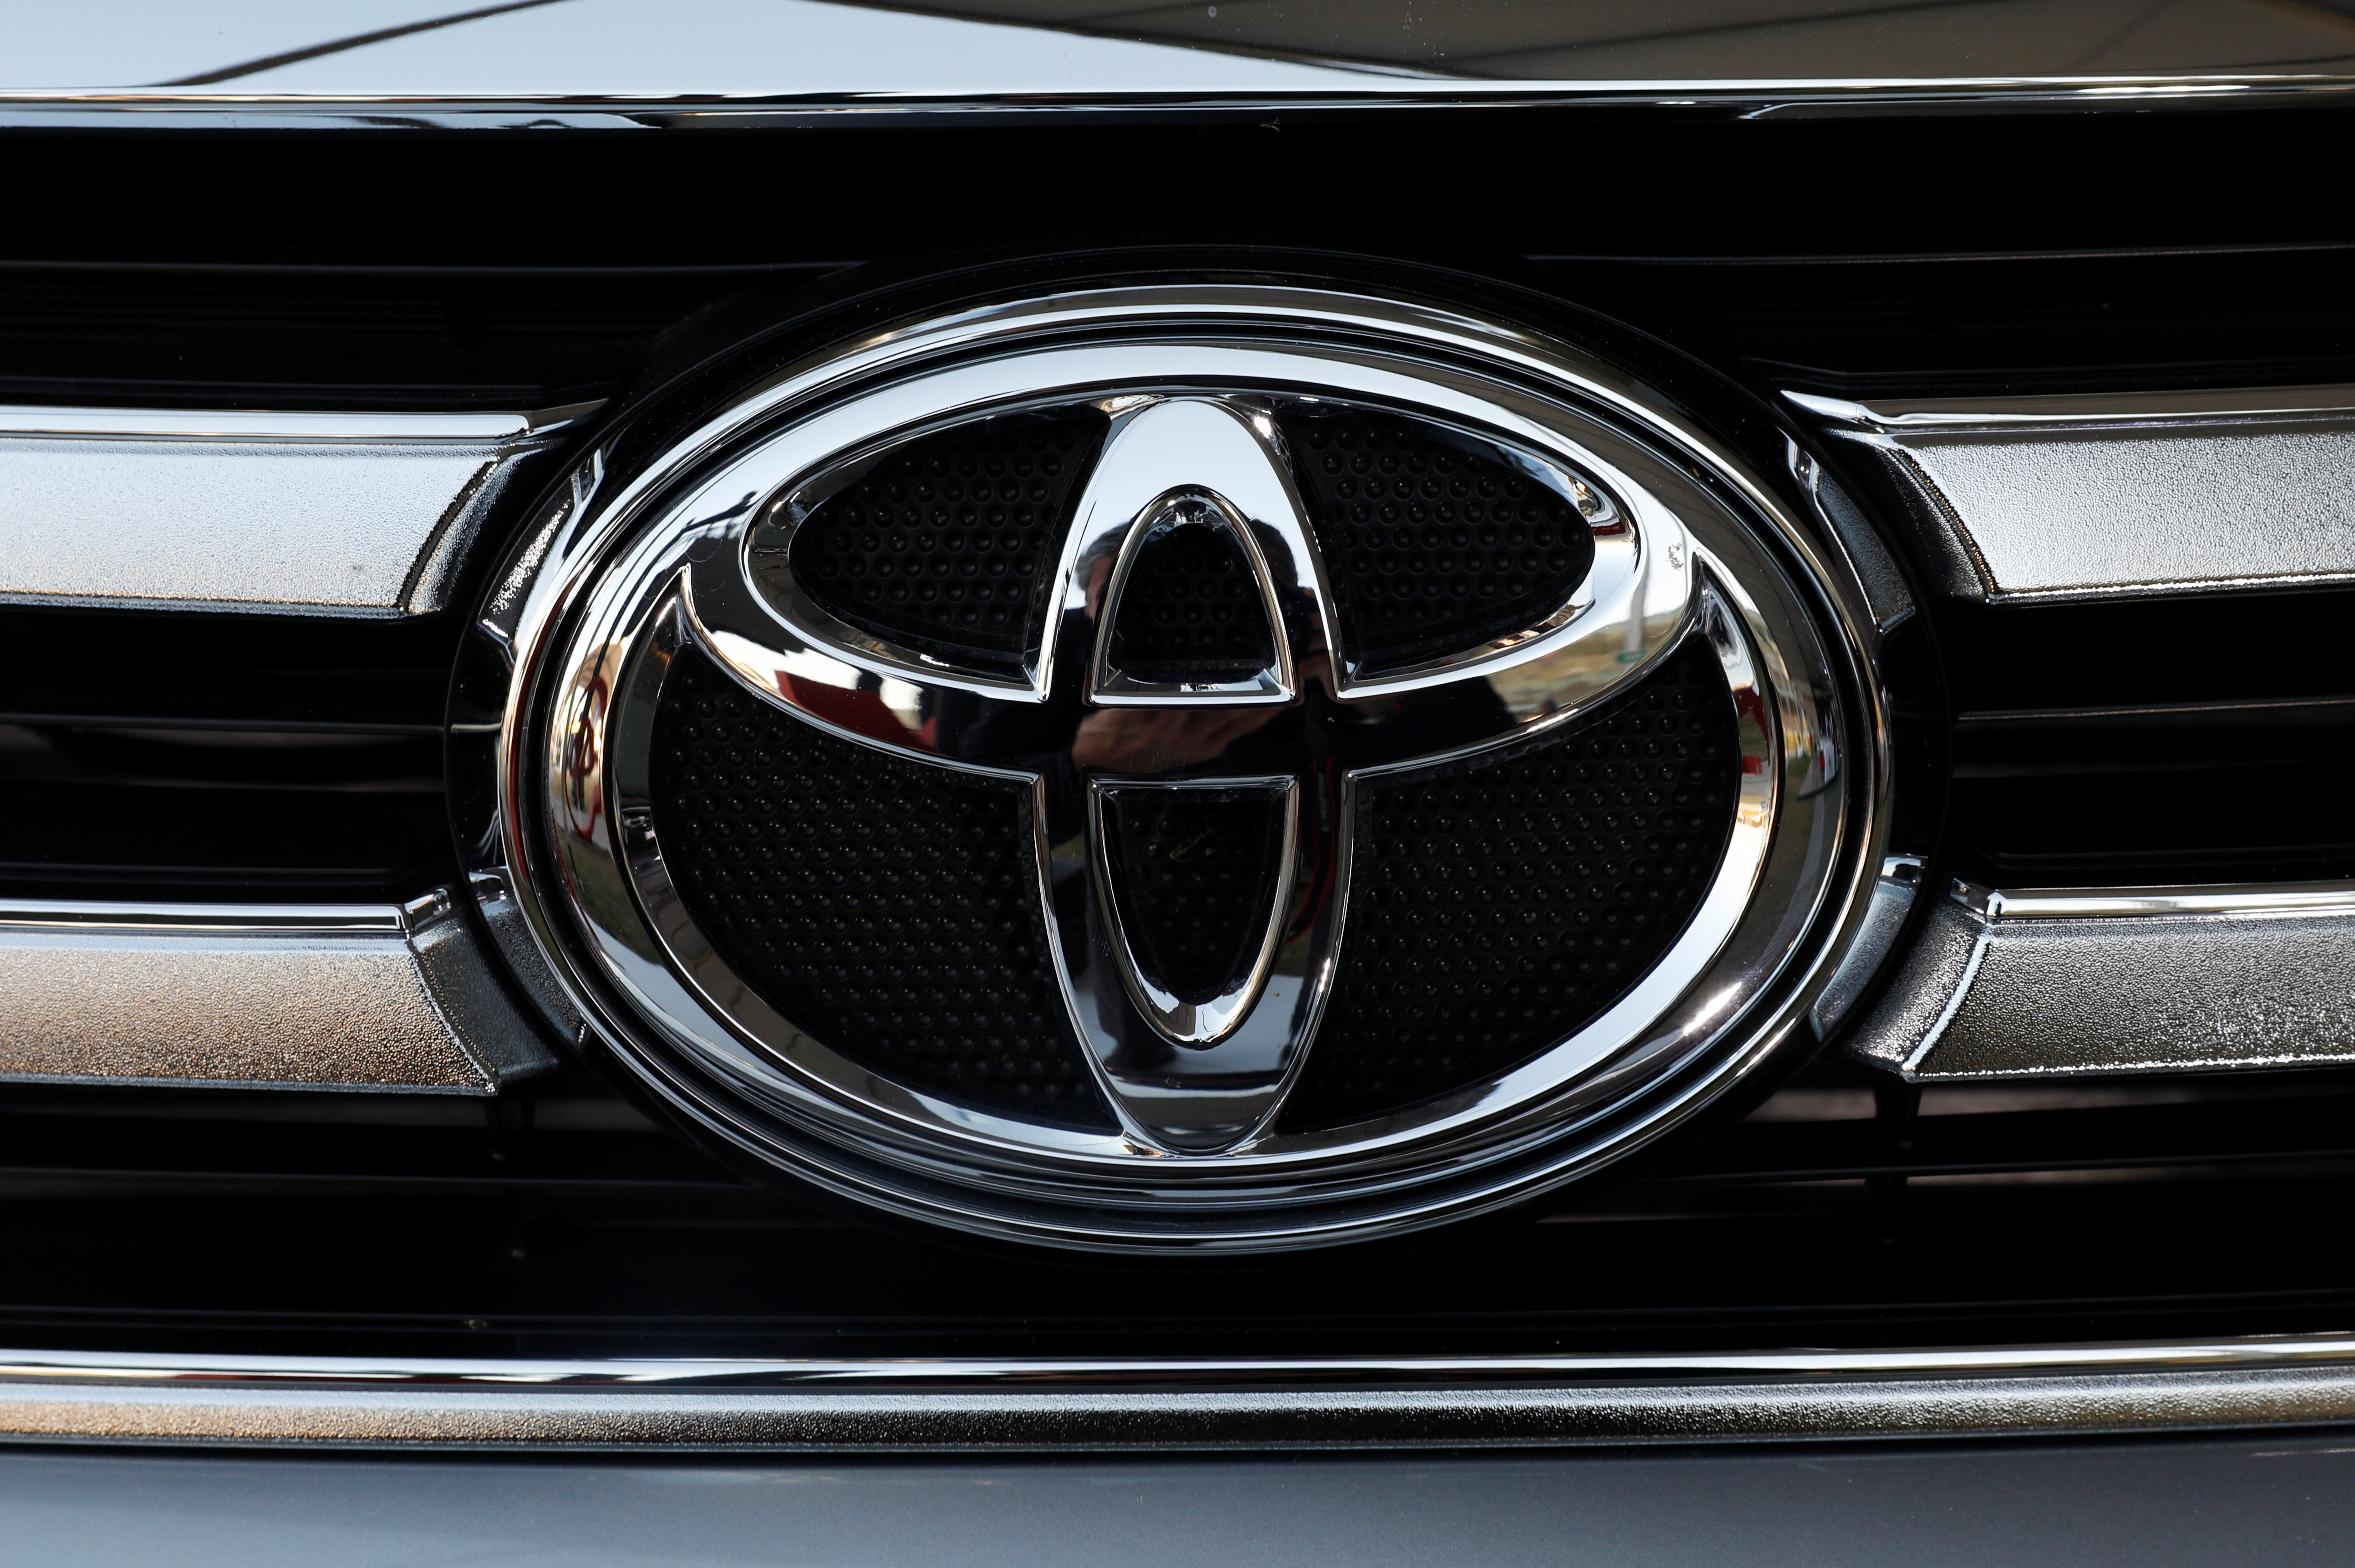 A Toyota Motor Corp. logo is seen on a car at the International Auto Show in Mexico City